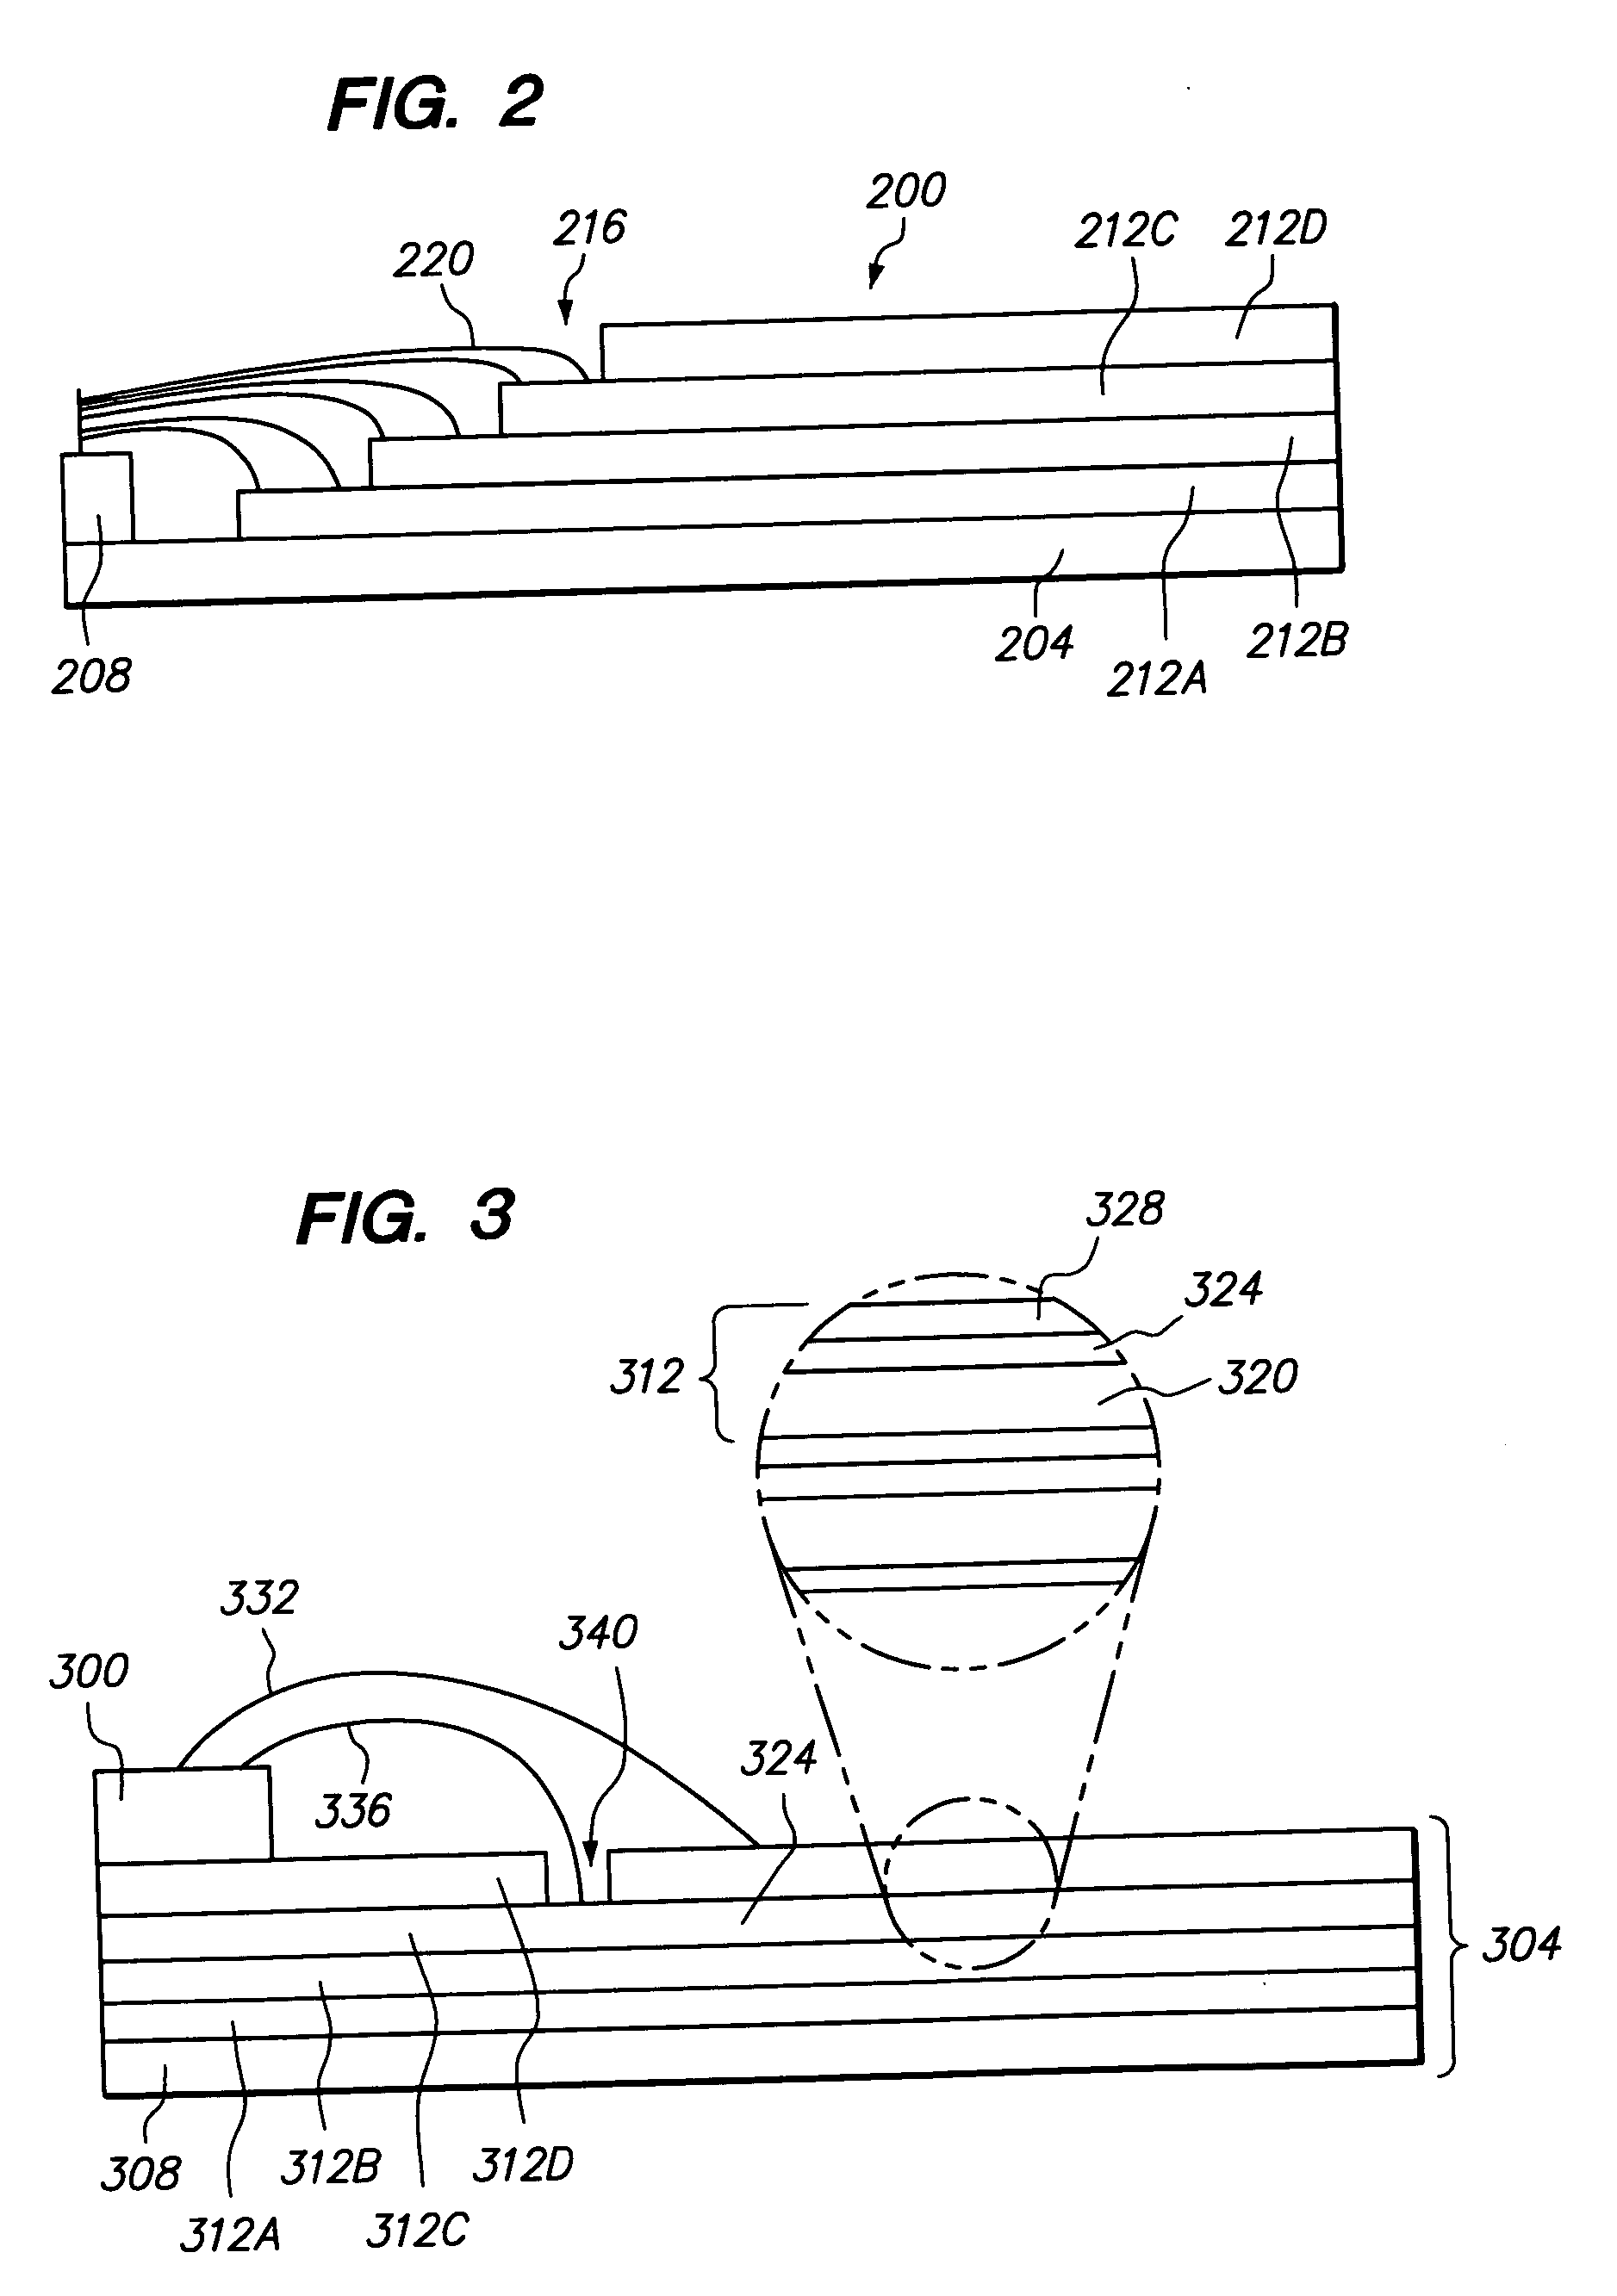 Package design and method for electrically connecting die to package